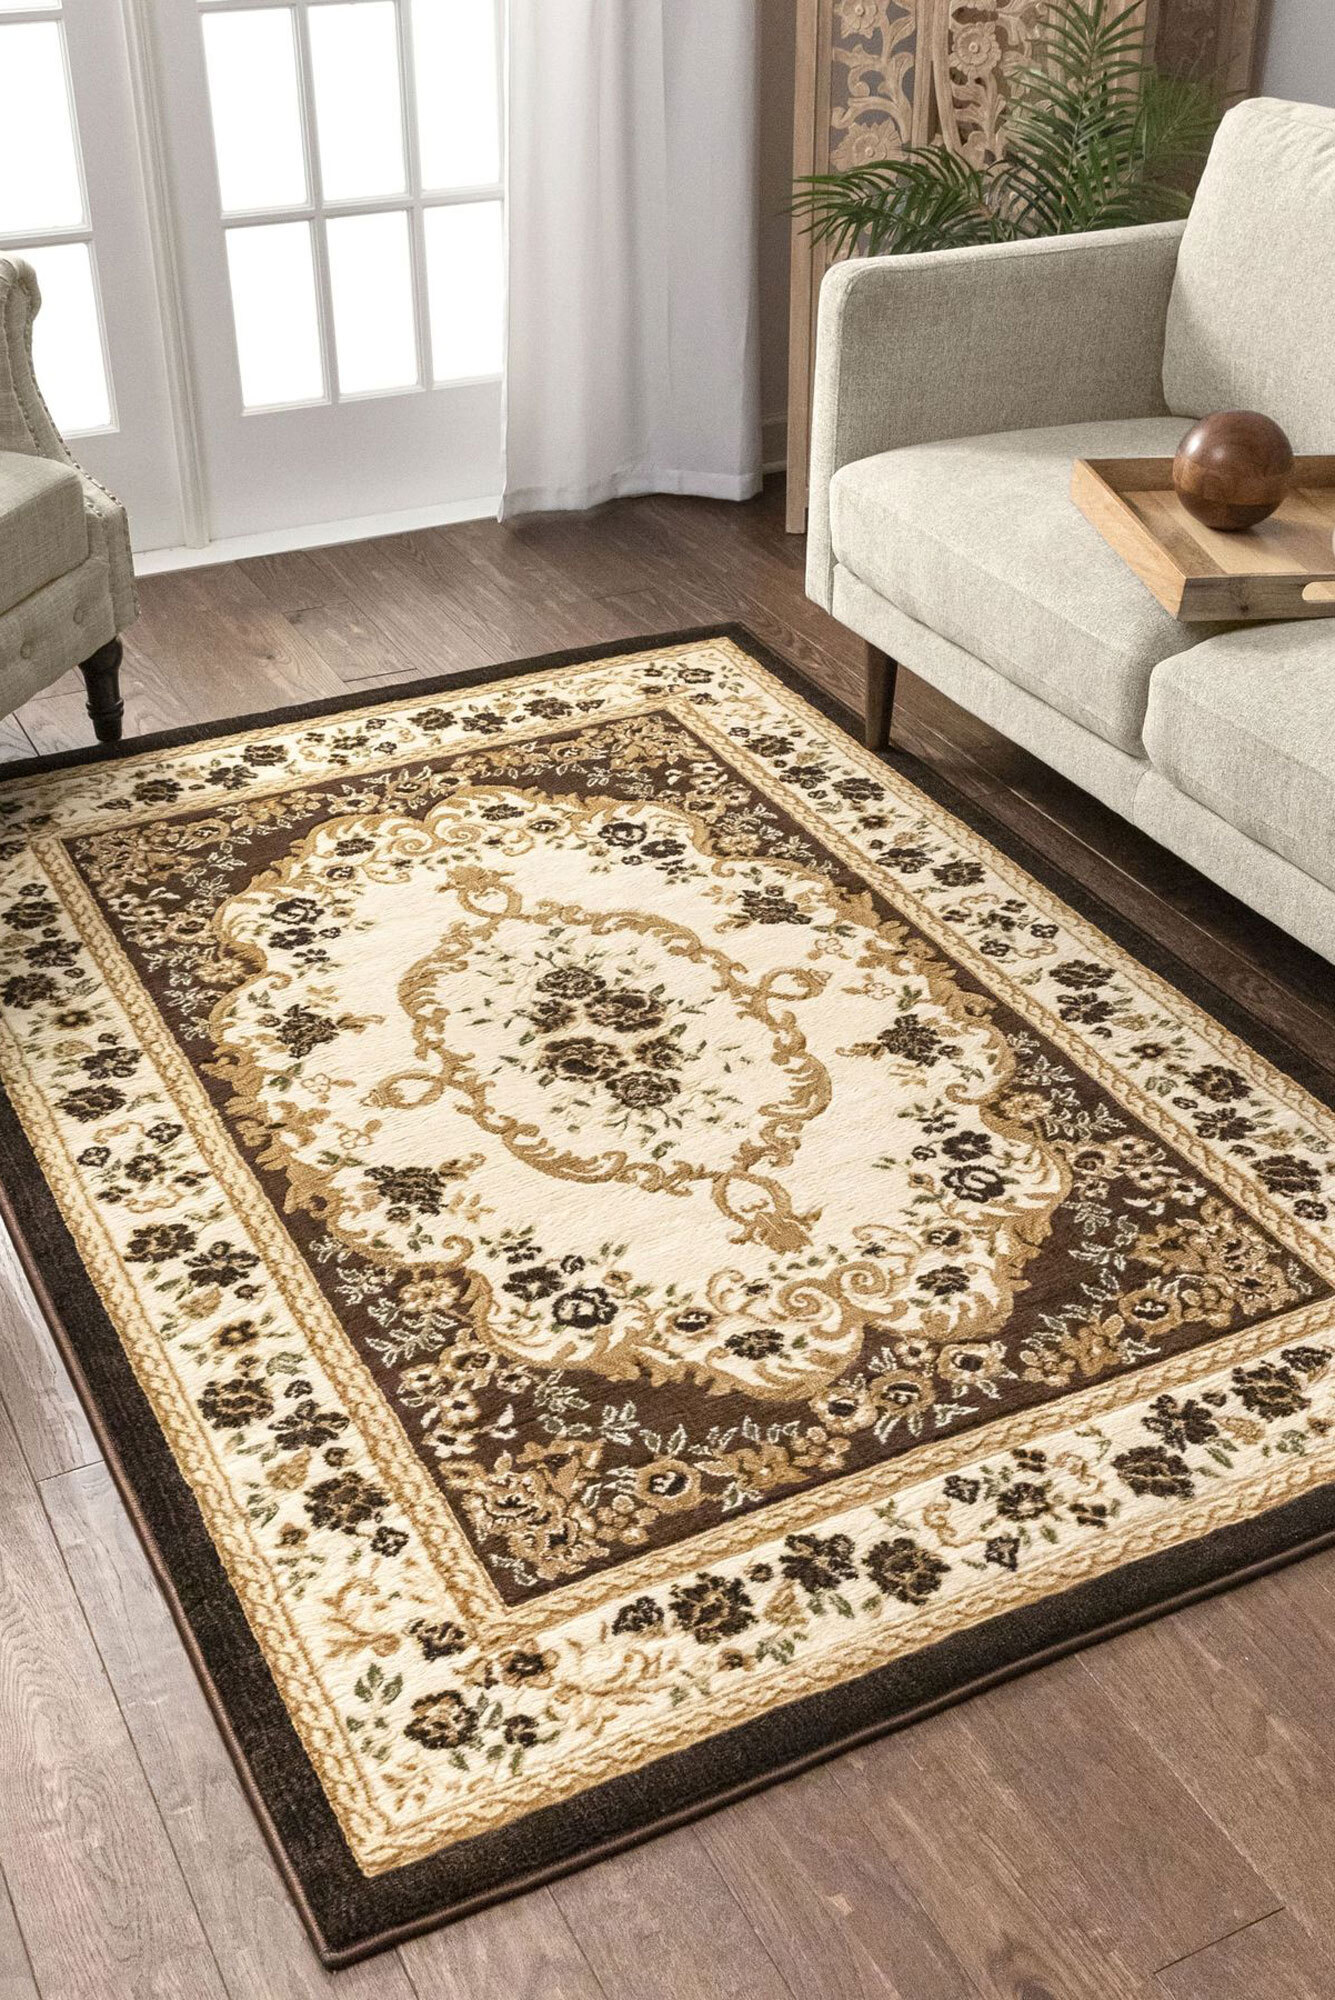 Axel Classic Floral Medallion Rug(Size 170 x 120cm)